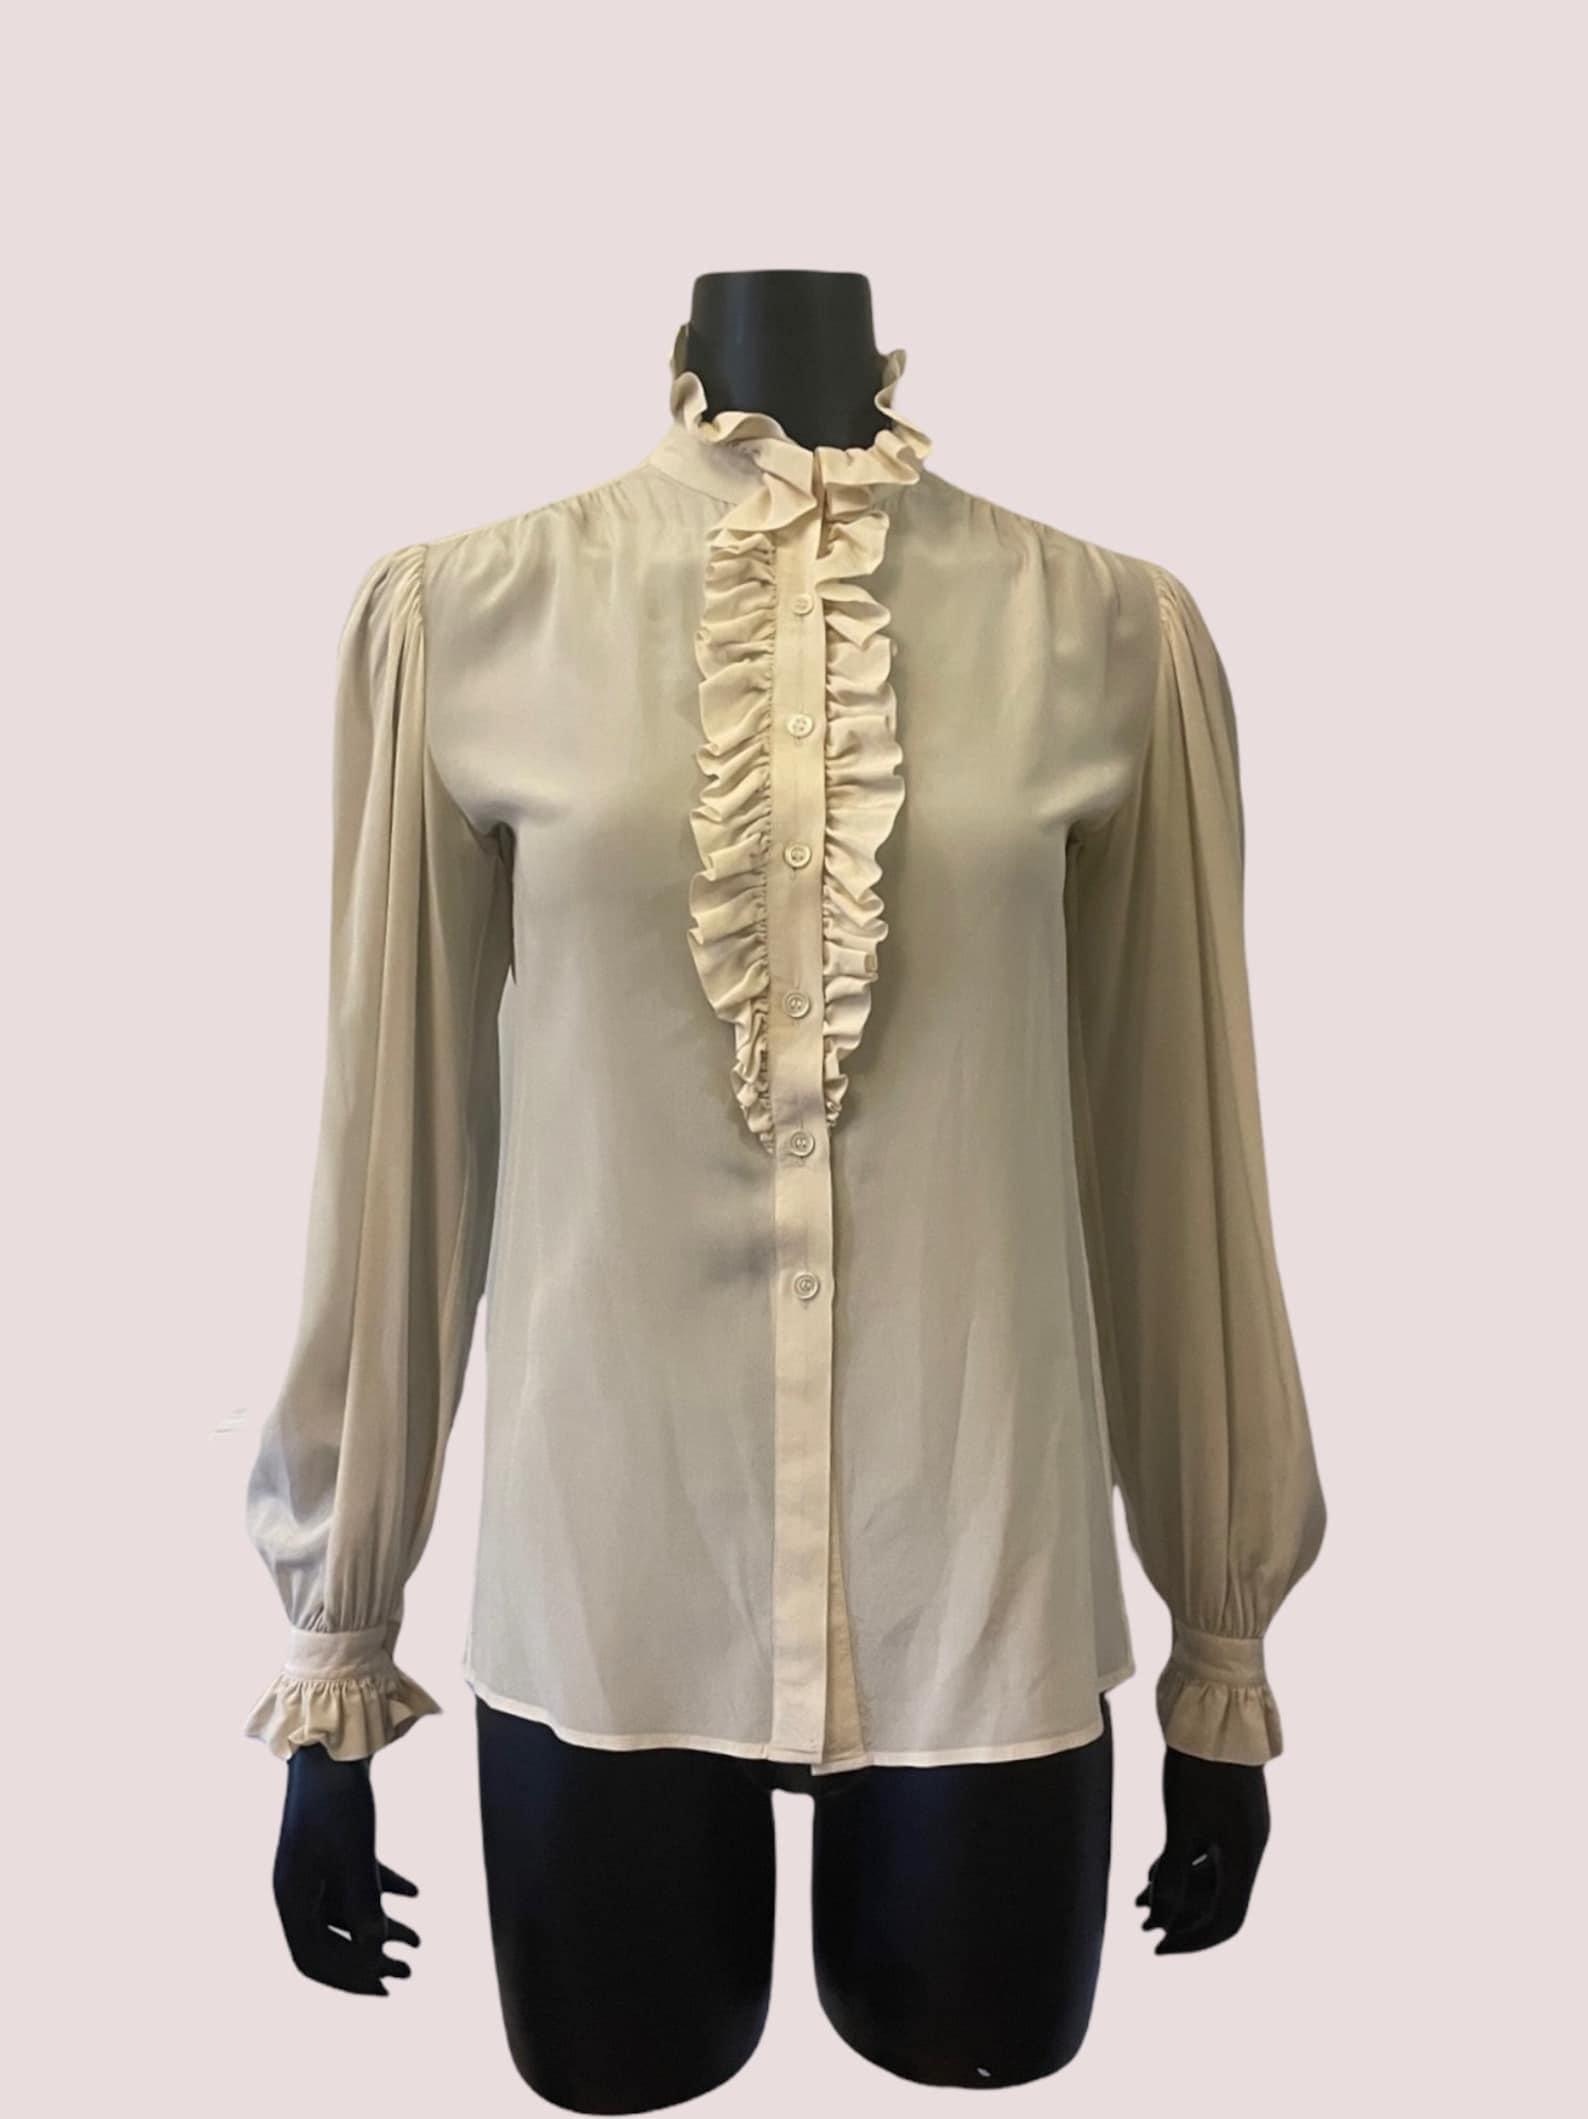 Yves Saint Laurent bone beige silk blouse. Jabot style ruffled collar, placket and cuffs. Long sleeves. Button front closure. Dry Cleaned.

Circa 1970s
Yves Saint Laurent Rive Gauche
Made in France
Tagged a size 36
100% Silk
Bone Beige 
Excellent